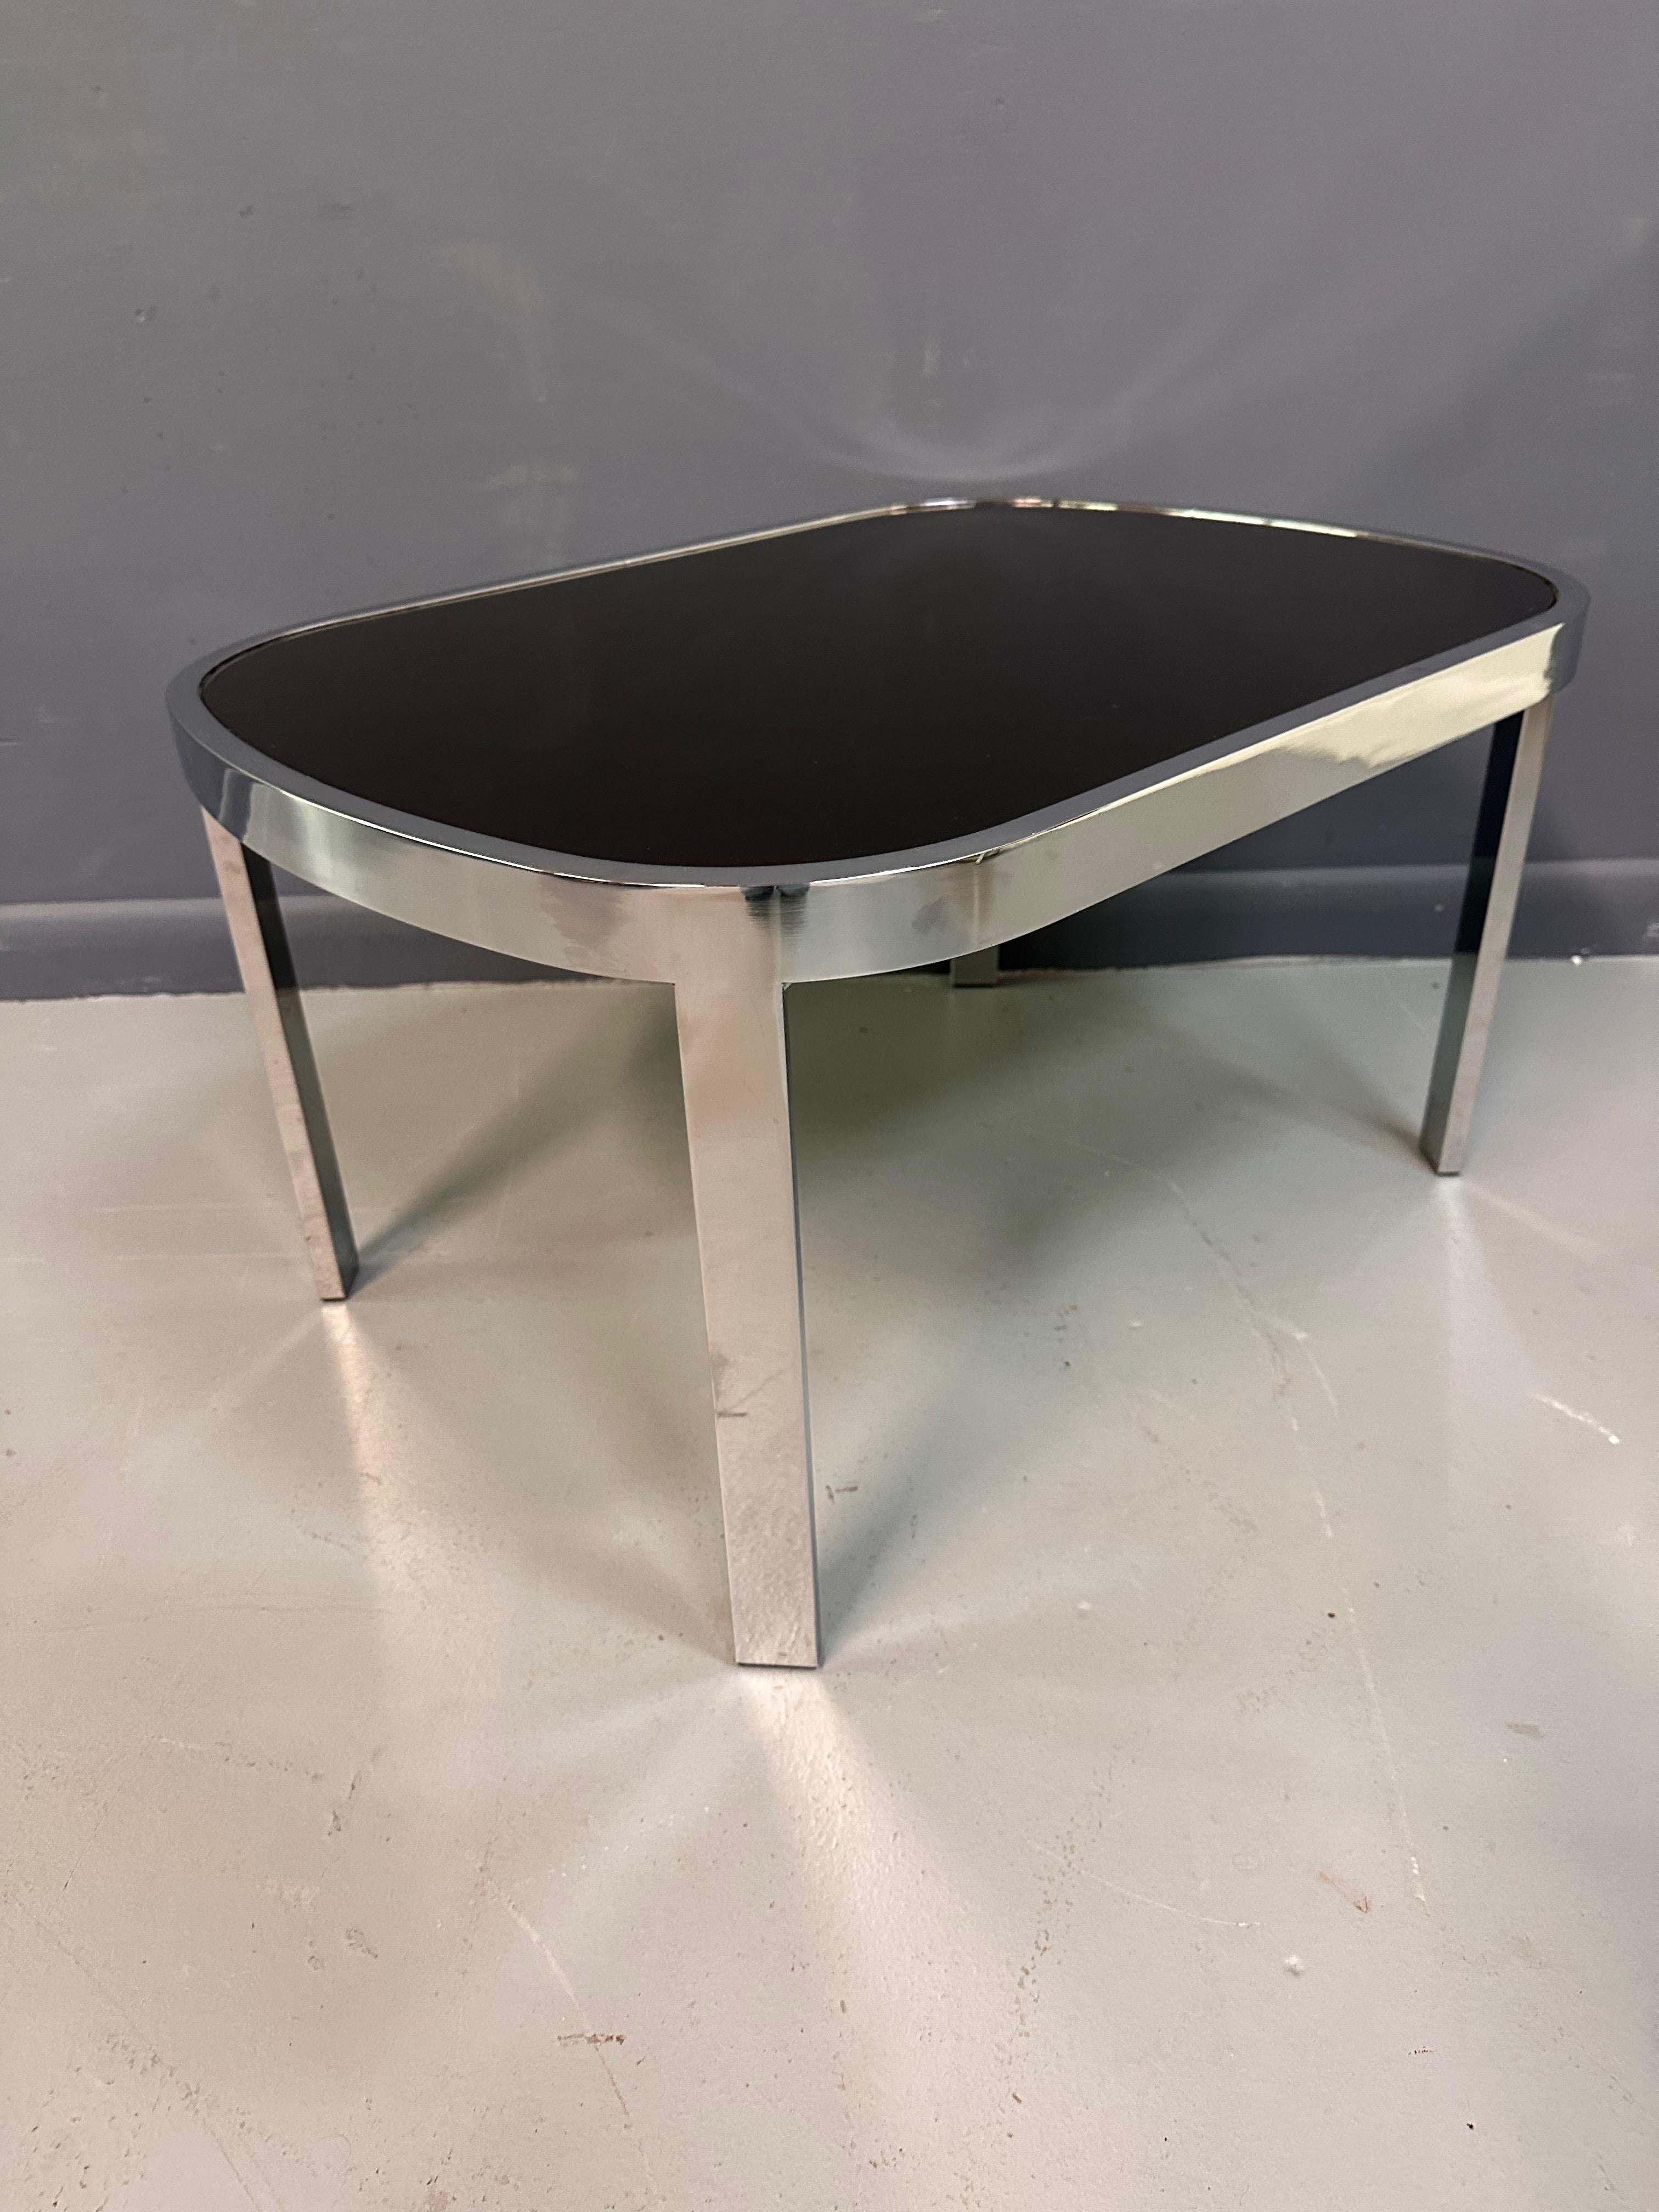 Sexy Milo Baughman side table in race track shape with a chrome frame and black glass insert. This side table will compliment many interiors but especially the mod 70s and 80s projects. This table looks like its moving fast just sitting there.